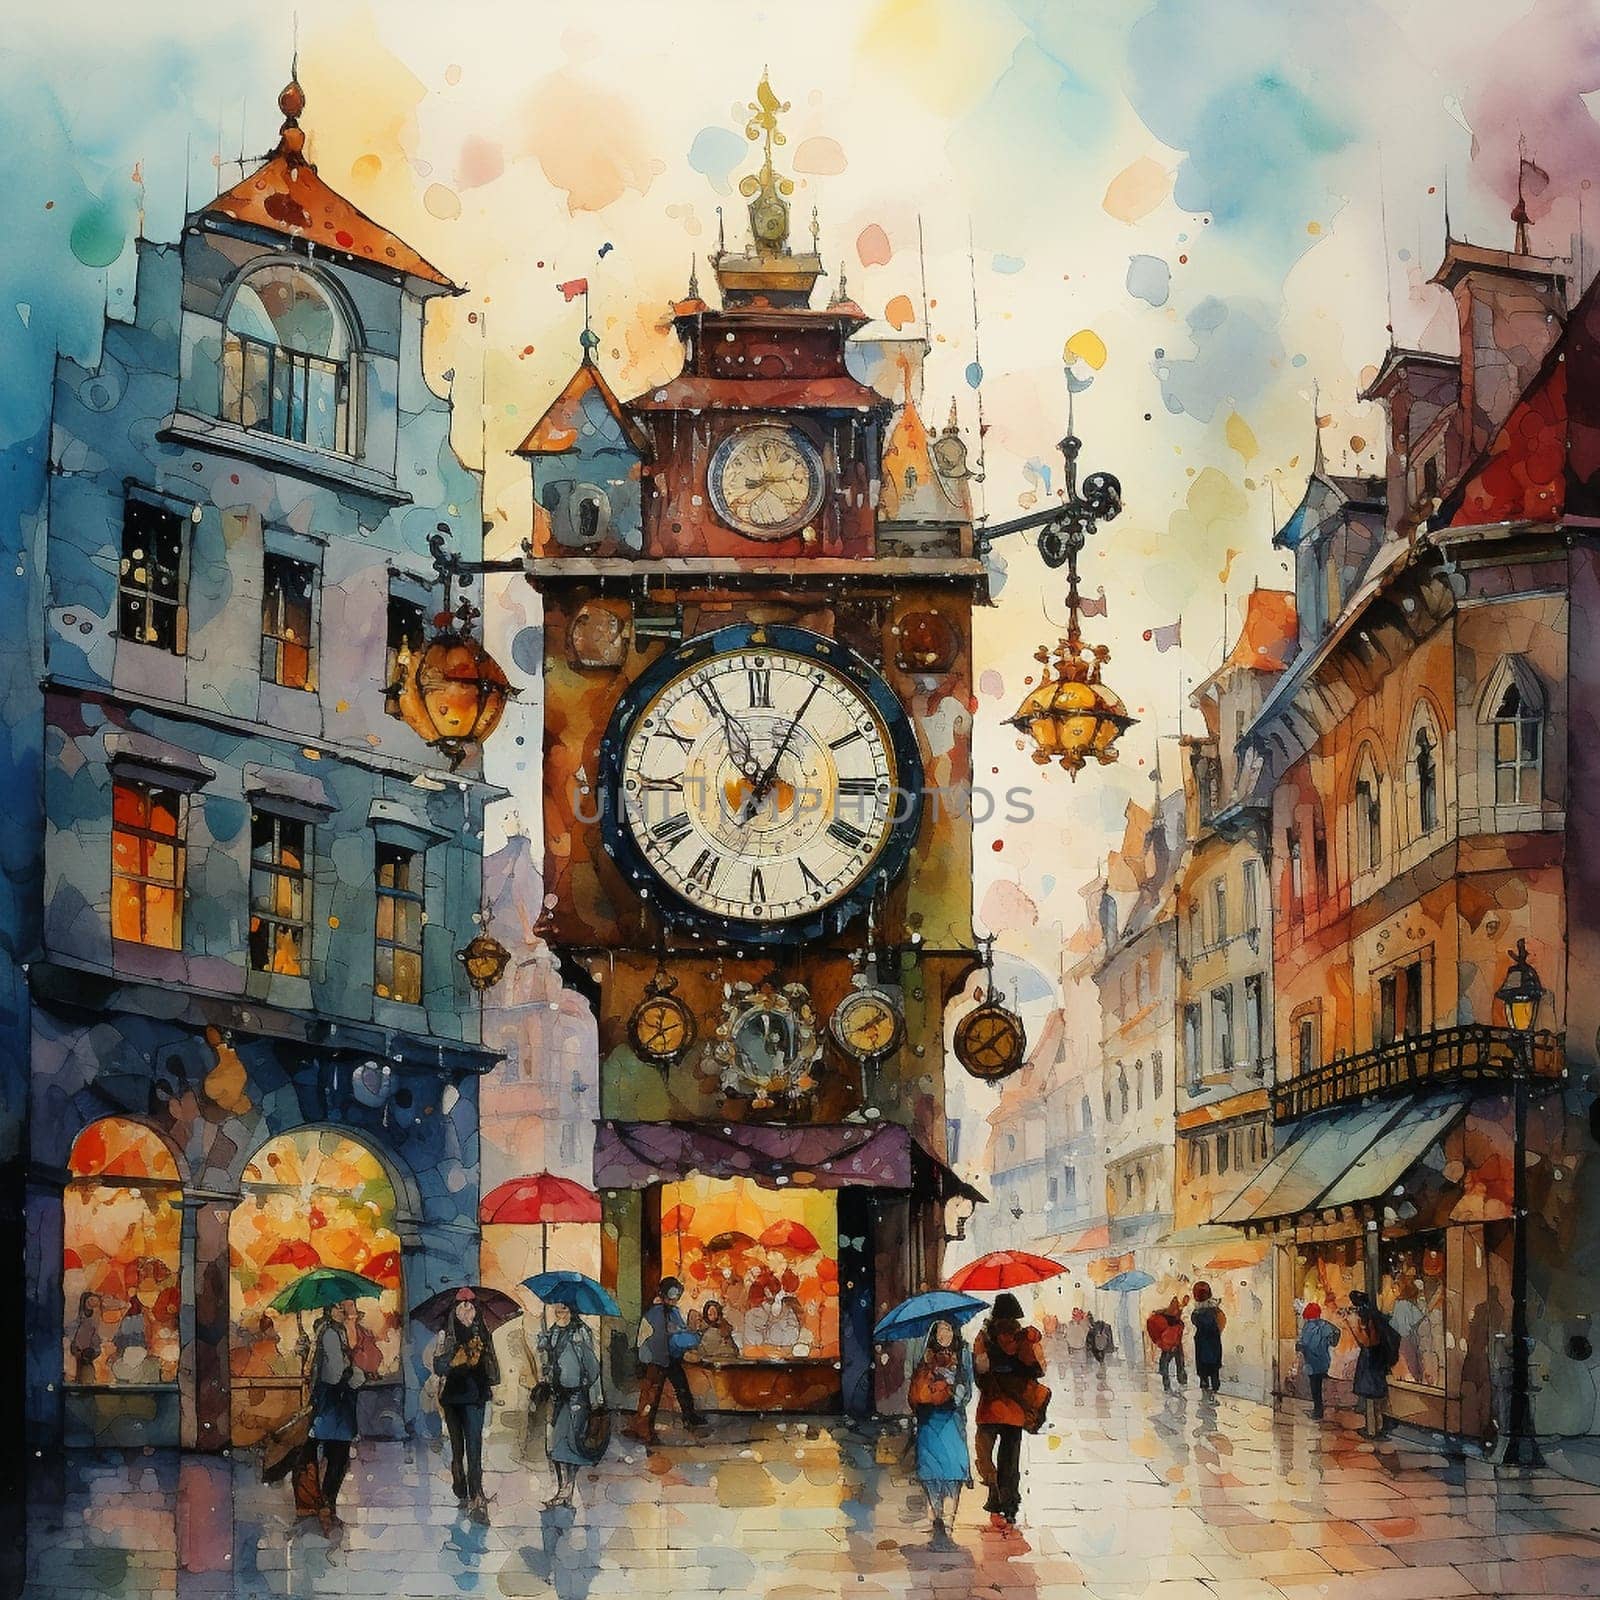 Immerse yourself in the whimsical art style of watercolor with this captivating image titled 'Time Traveler: A Journey through Vintage Clocks.' Transport yourself to a bustling city square filled with peculiar vintage clocks of all shapes and sizes. The artwork depicts a diverse group of people - from vividly dressed locals to curious tourists - marveling at the mystical powers of these antique timekeepers. Let this art piece take you on a journey through time, blending the nostalgic charm of the olden days with a touch of enchantment.